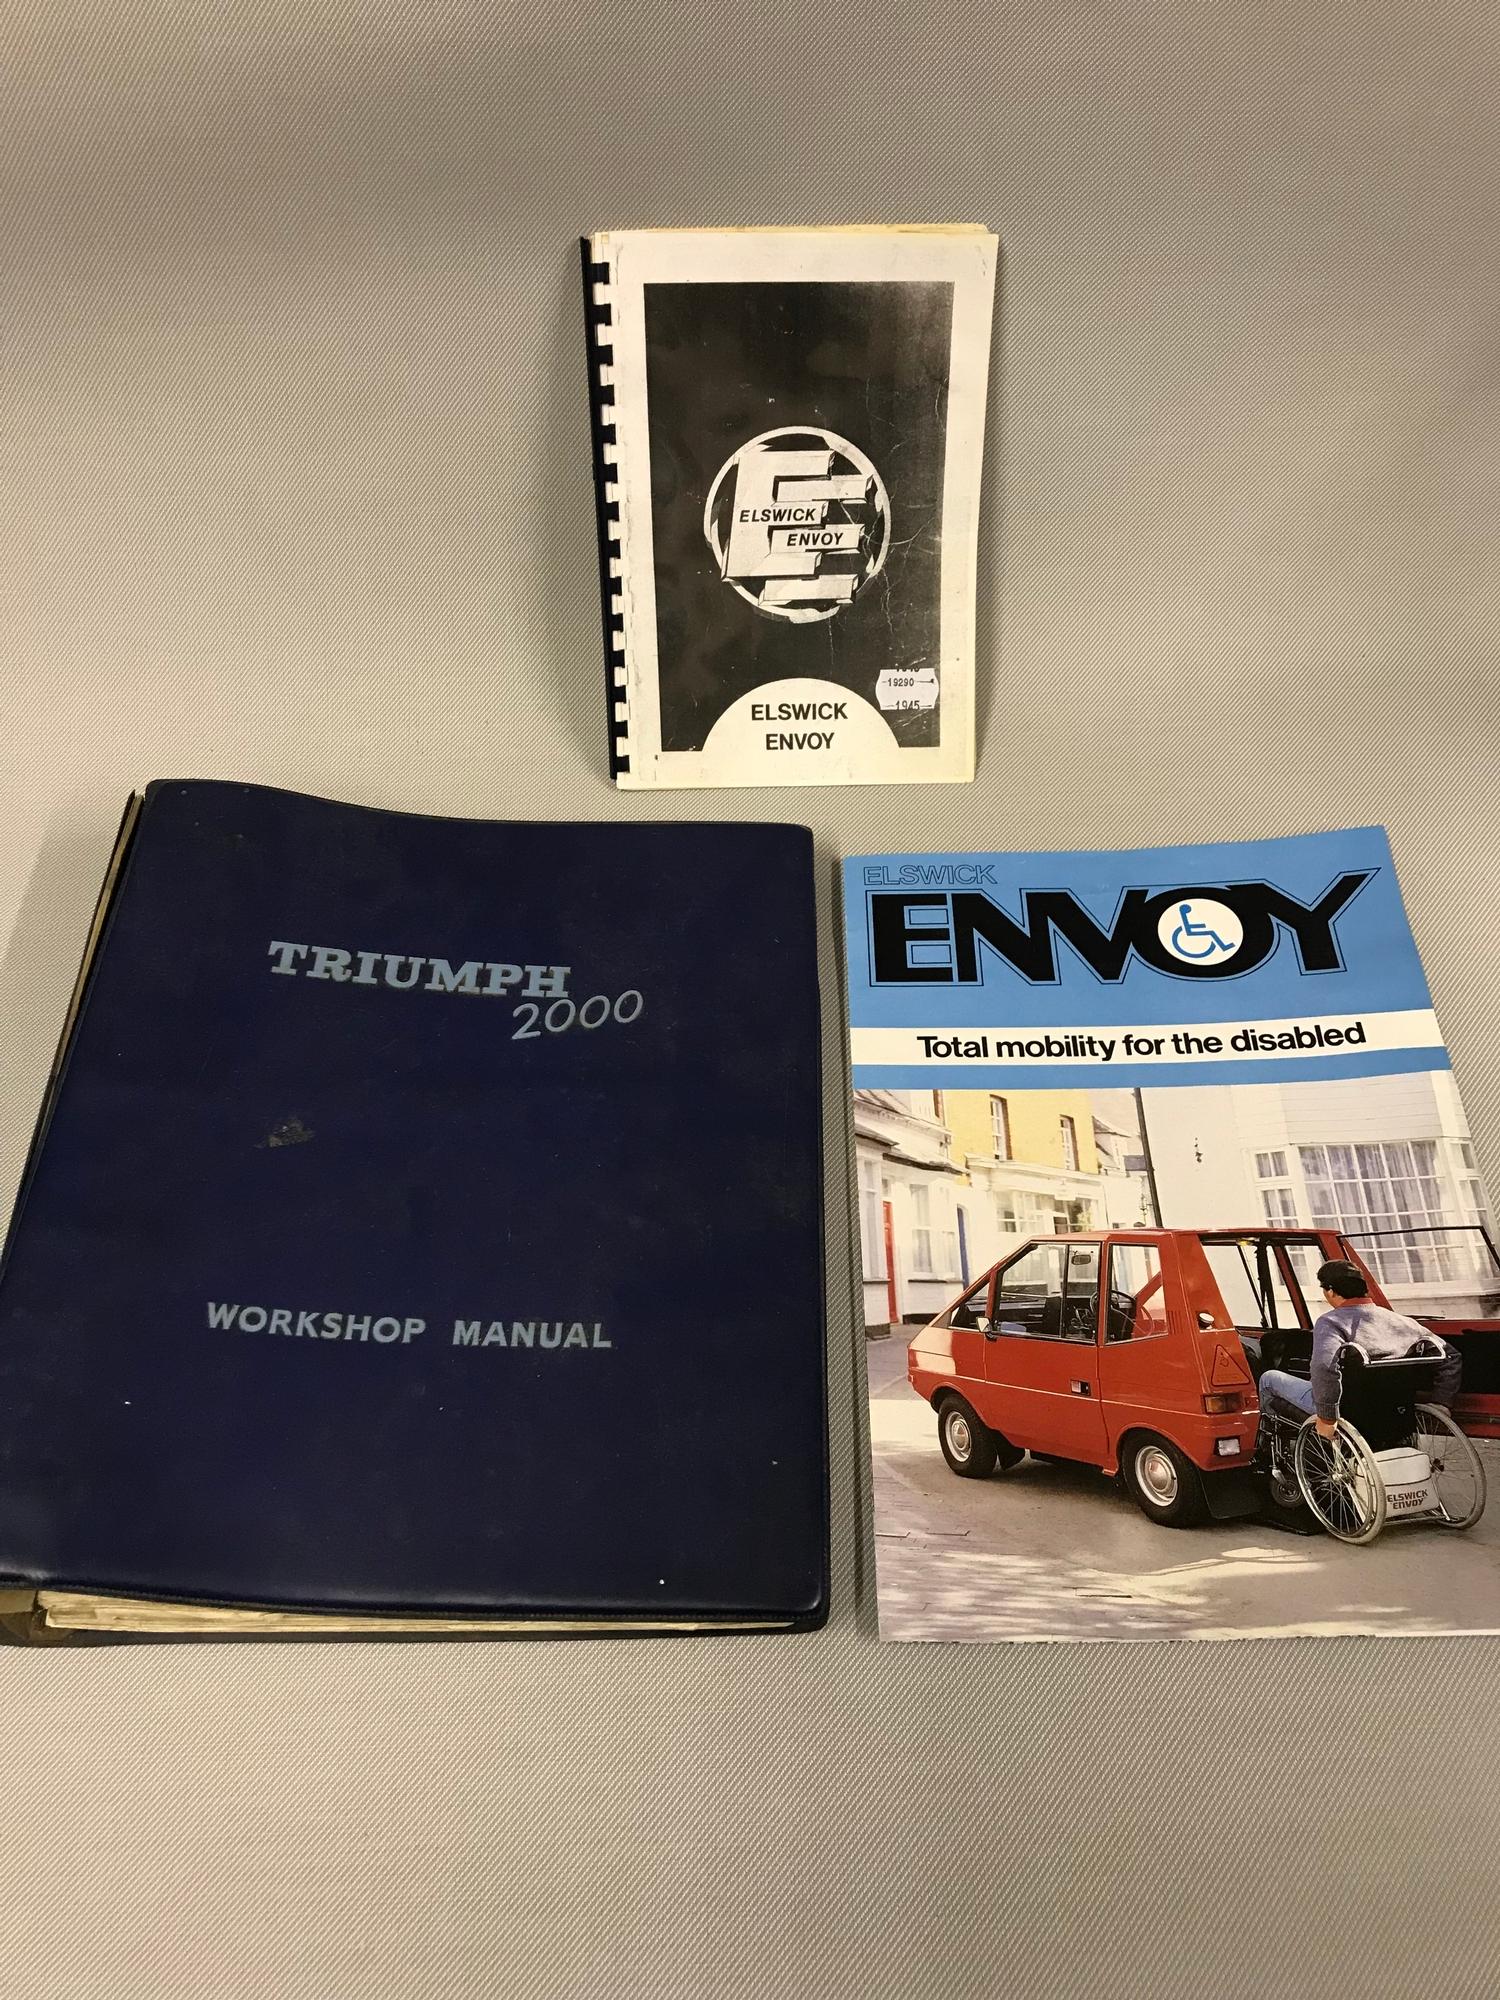 Triumph 2000 workshop manual, Elswick Envoy drivers hand book and one other